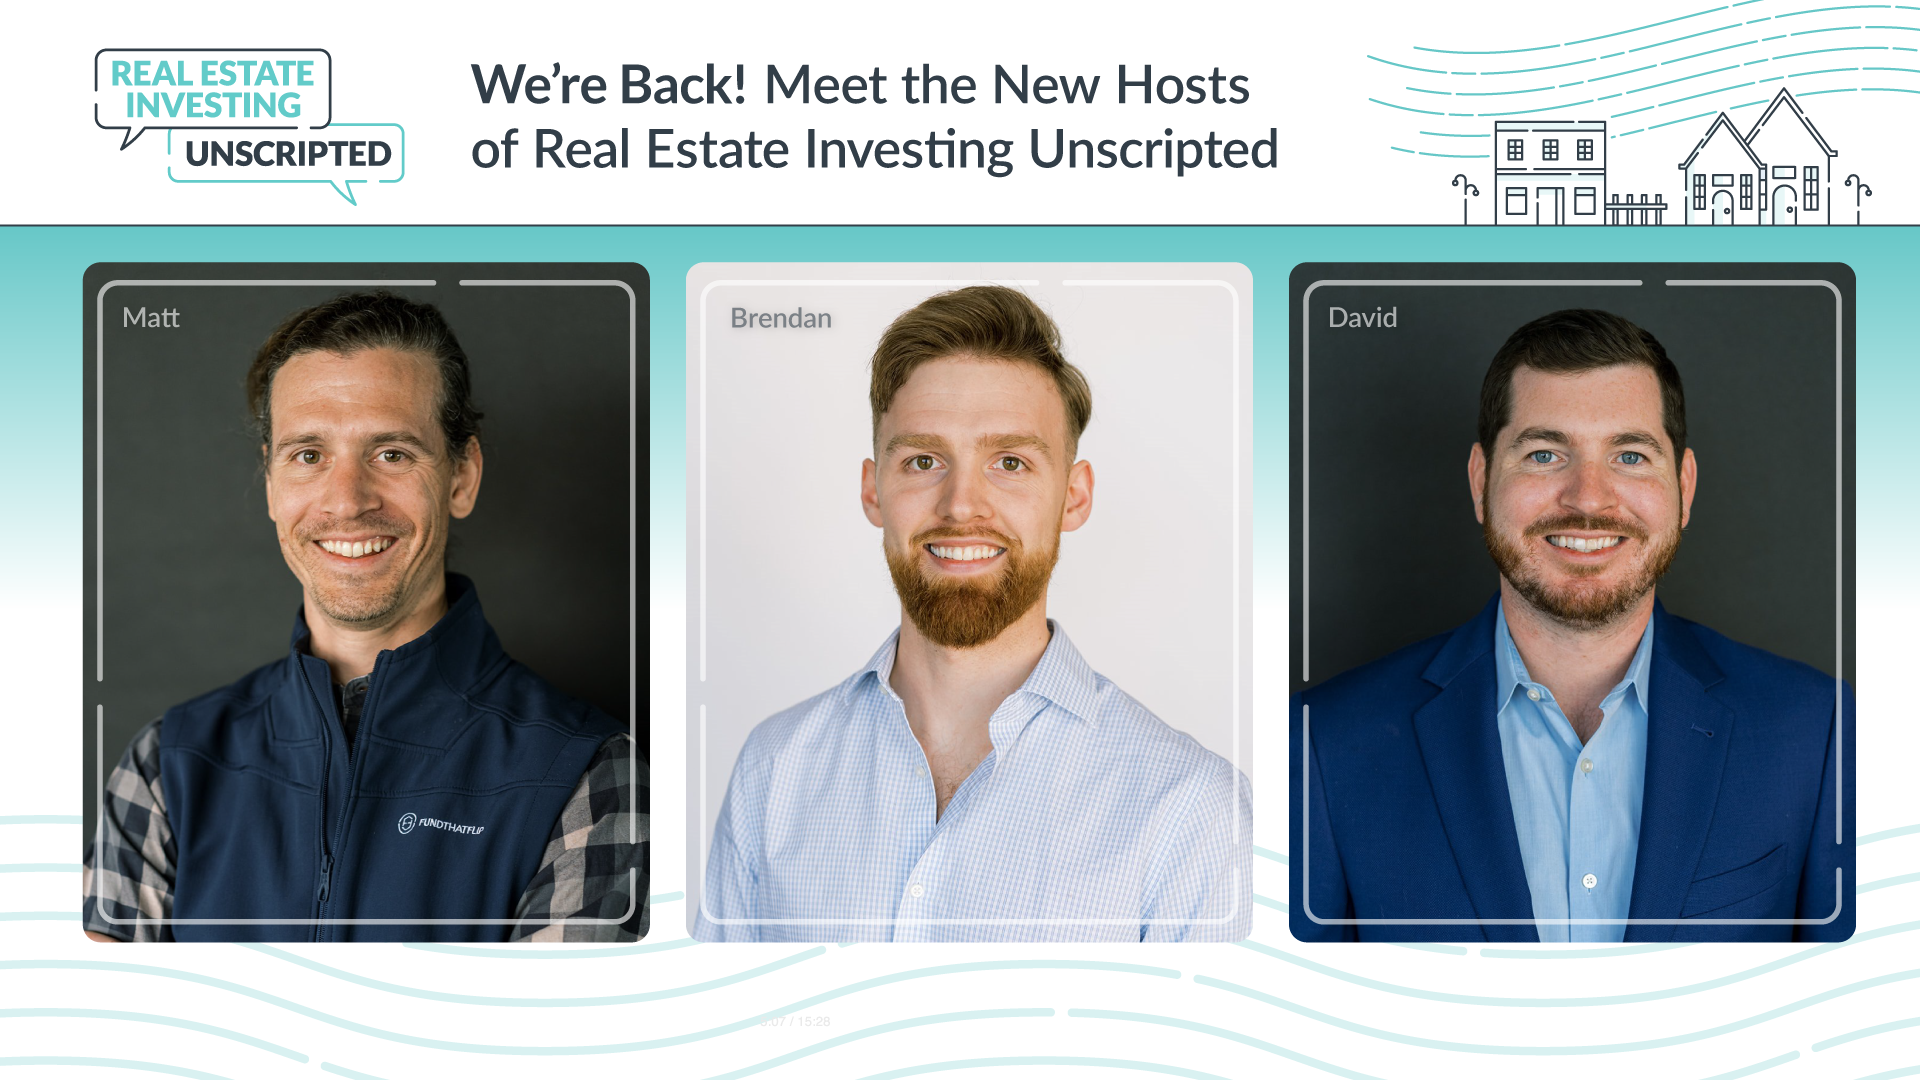 Matt Rodak joins us on our Pilot to hand off the reigns to Brendan Bennett (job title) and David Duggan, and talk about the current state of real estate.